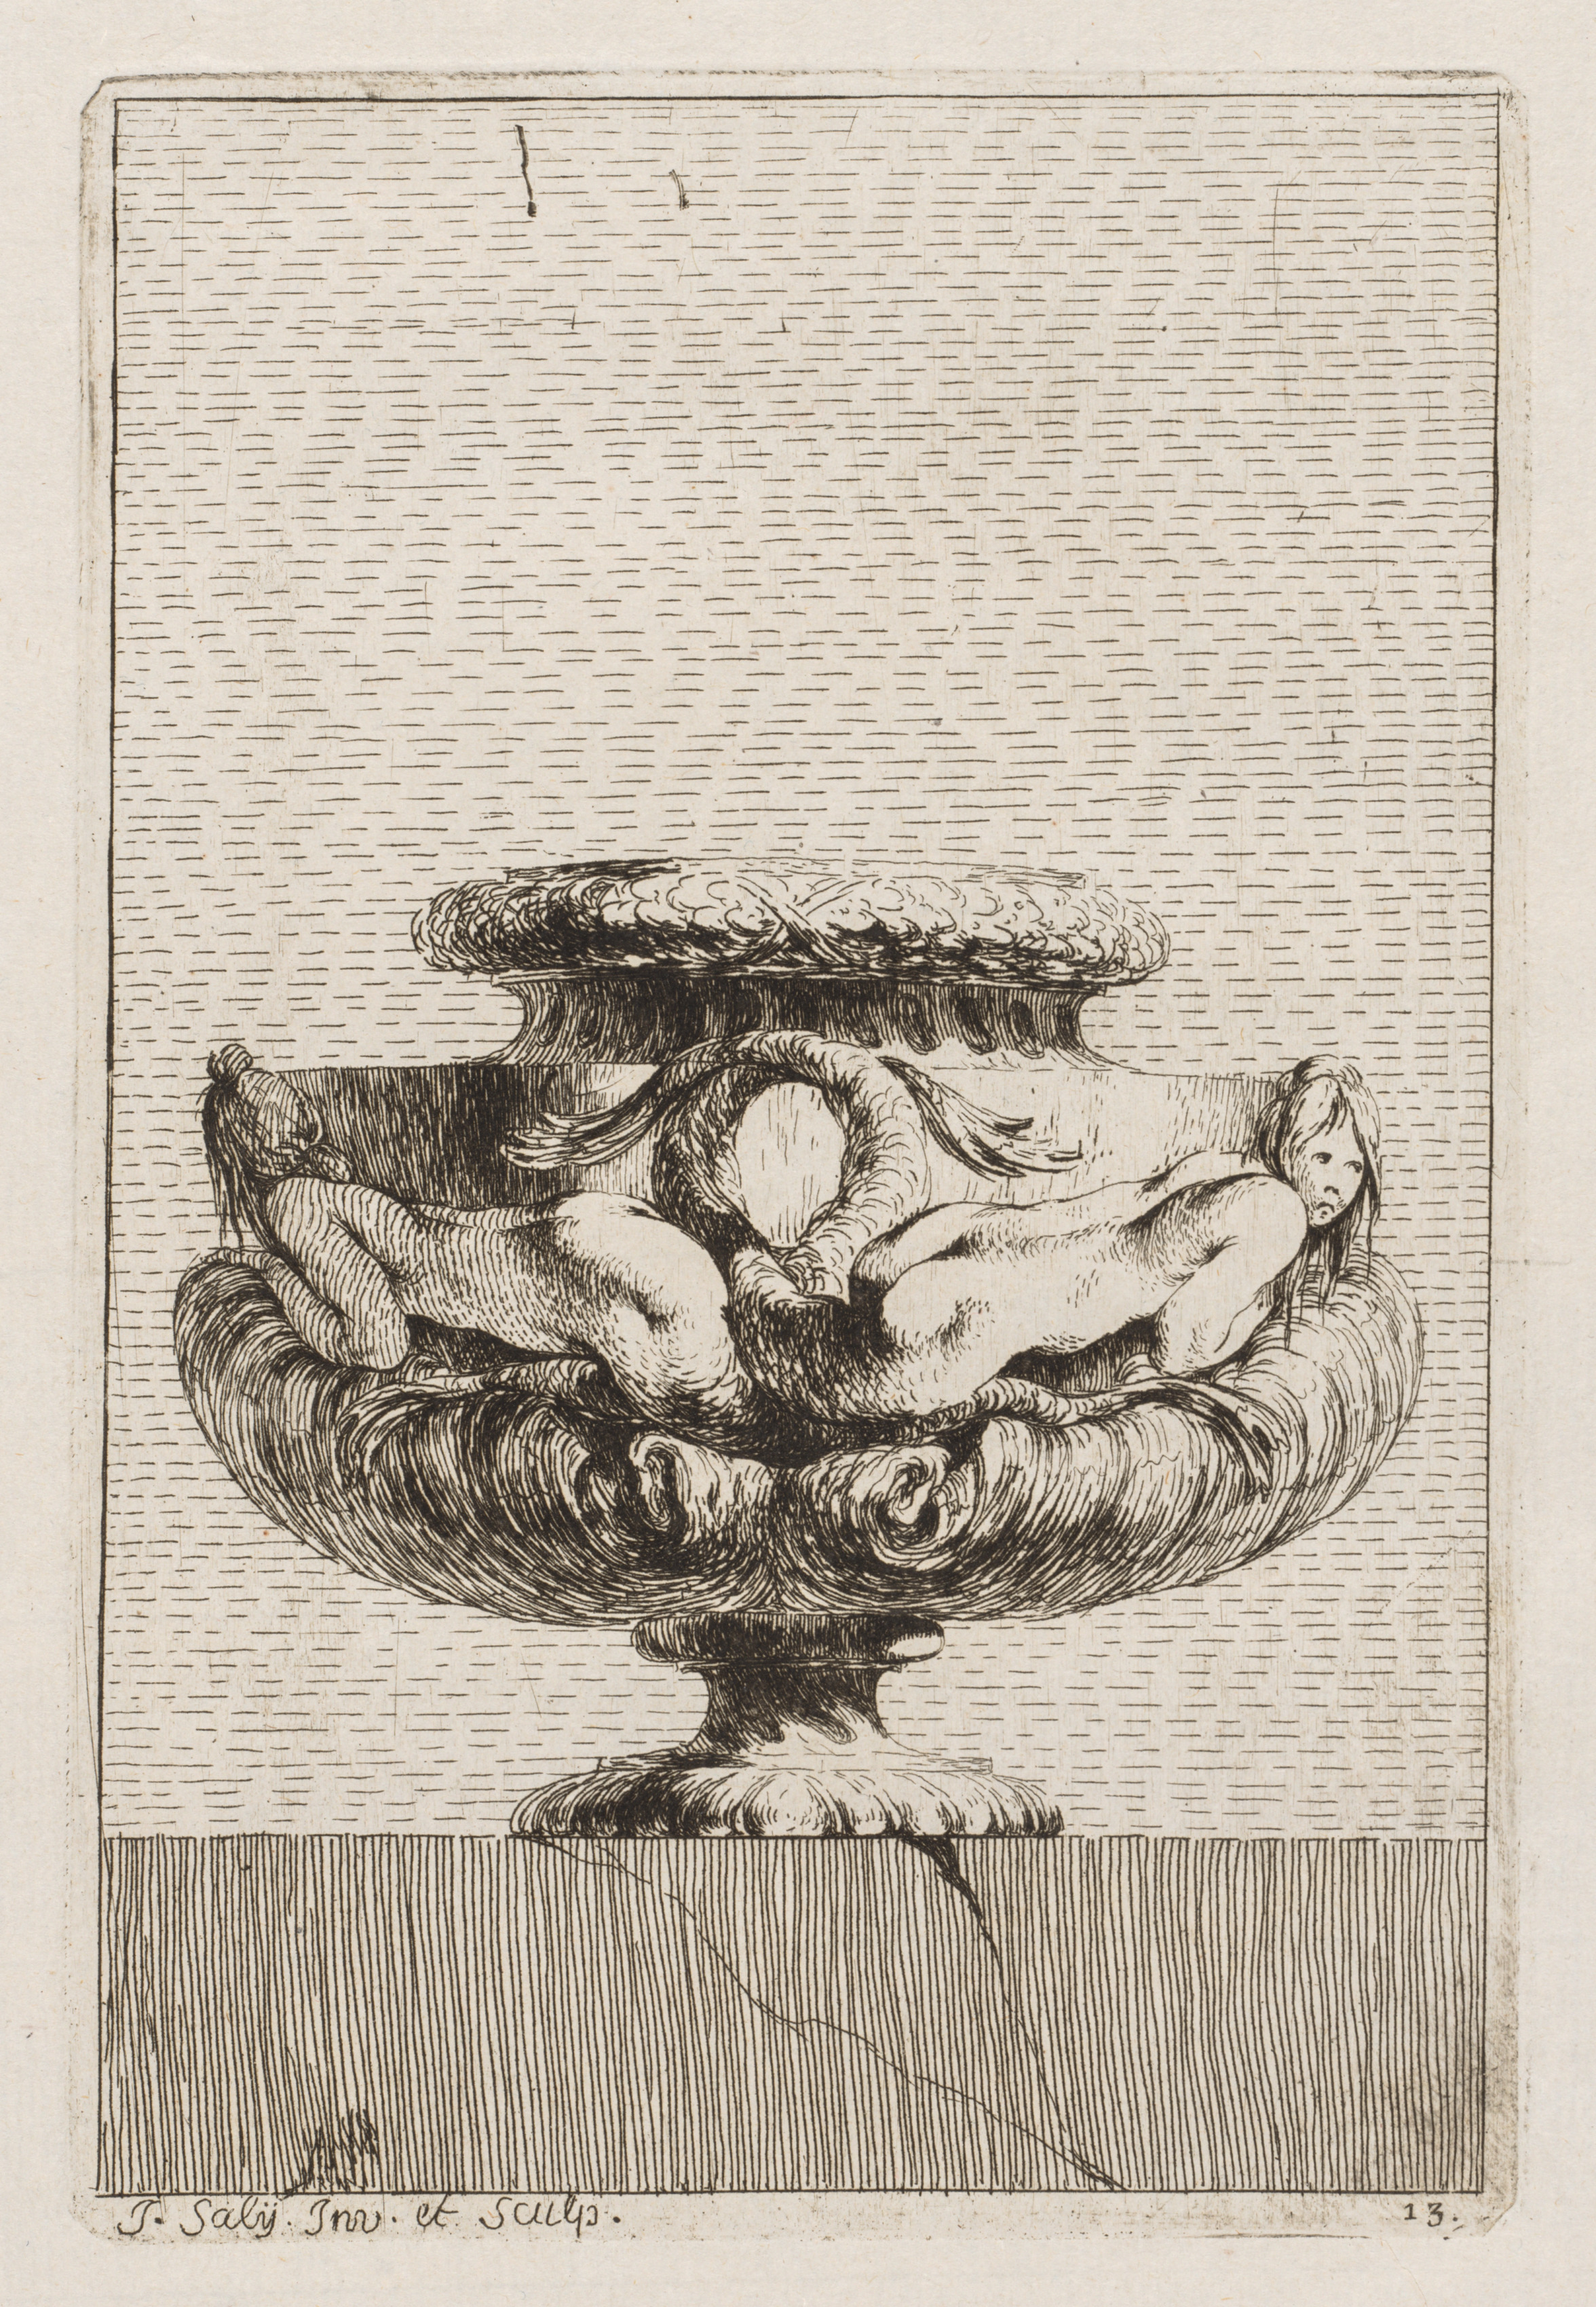 Suite of Vases:  Plate 13